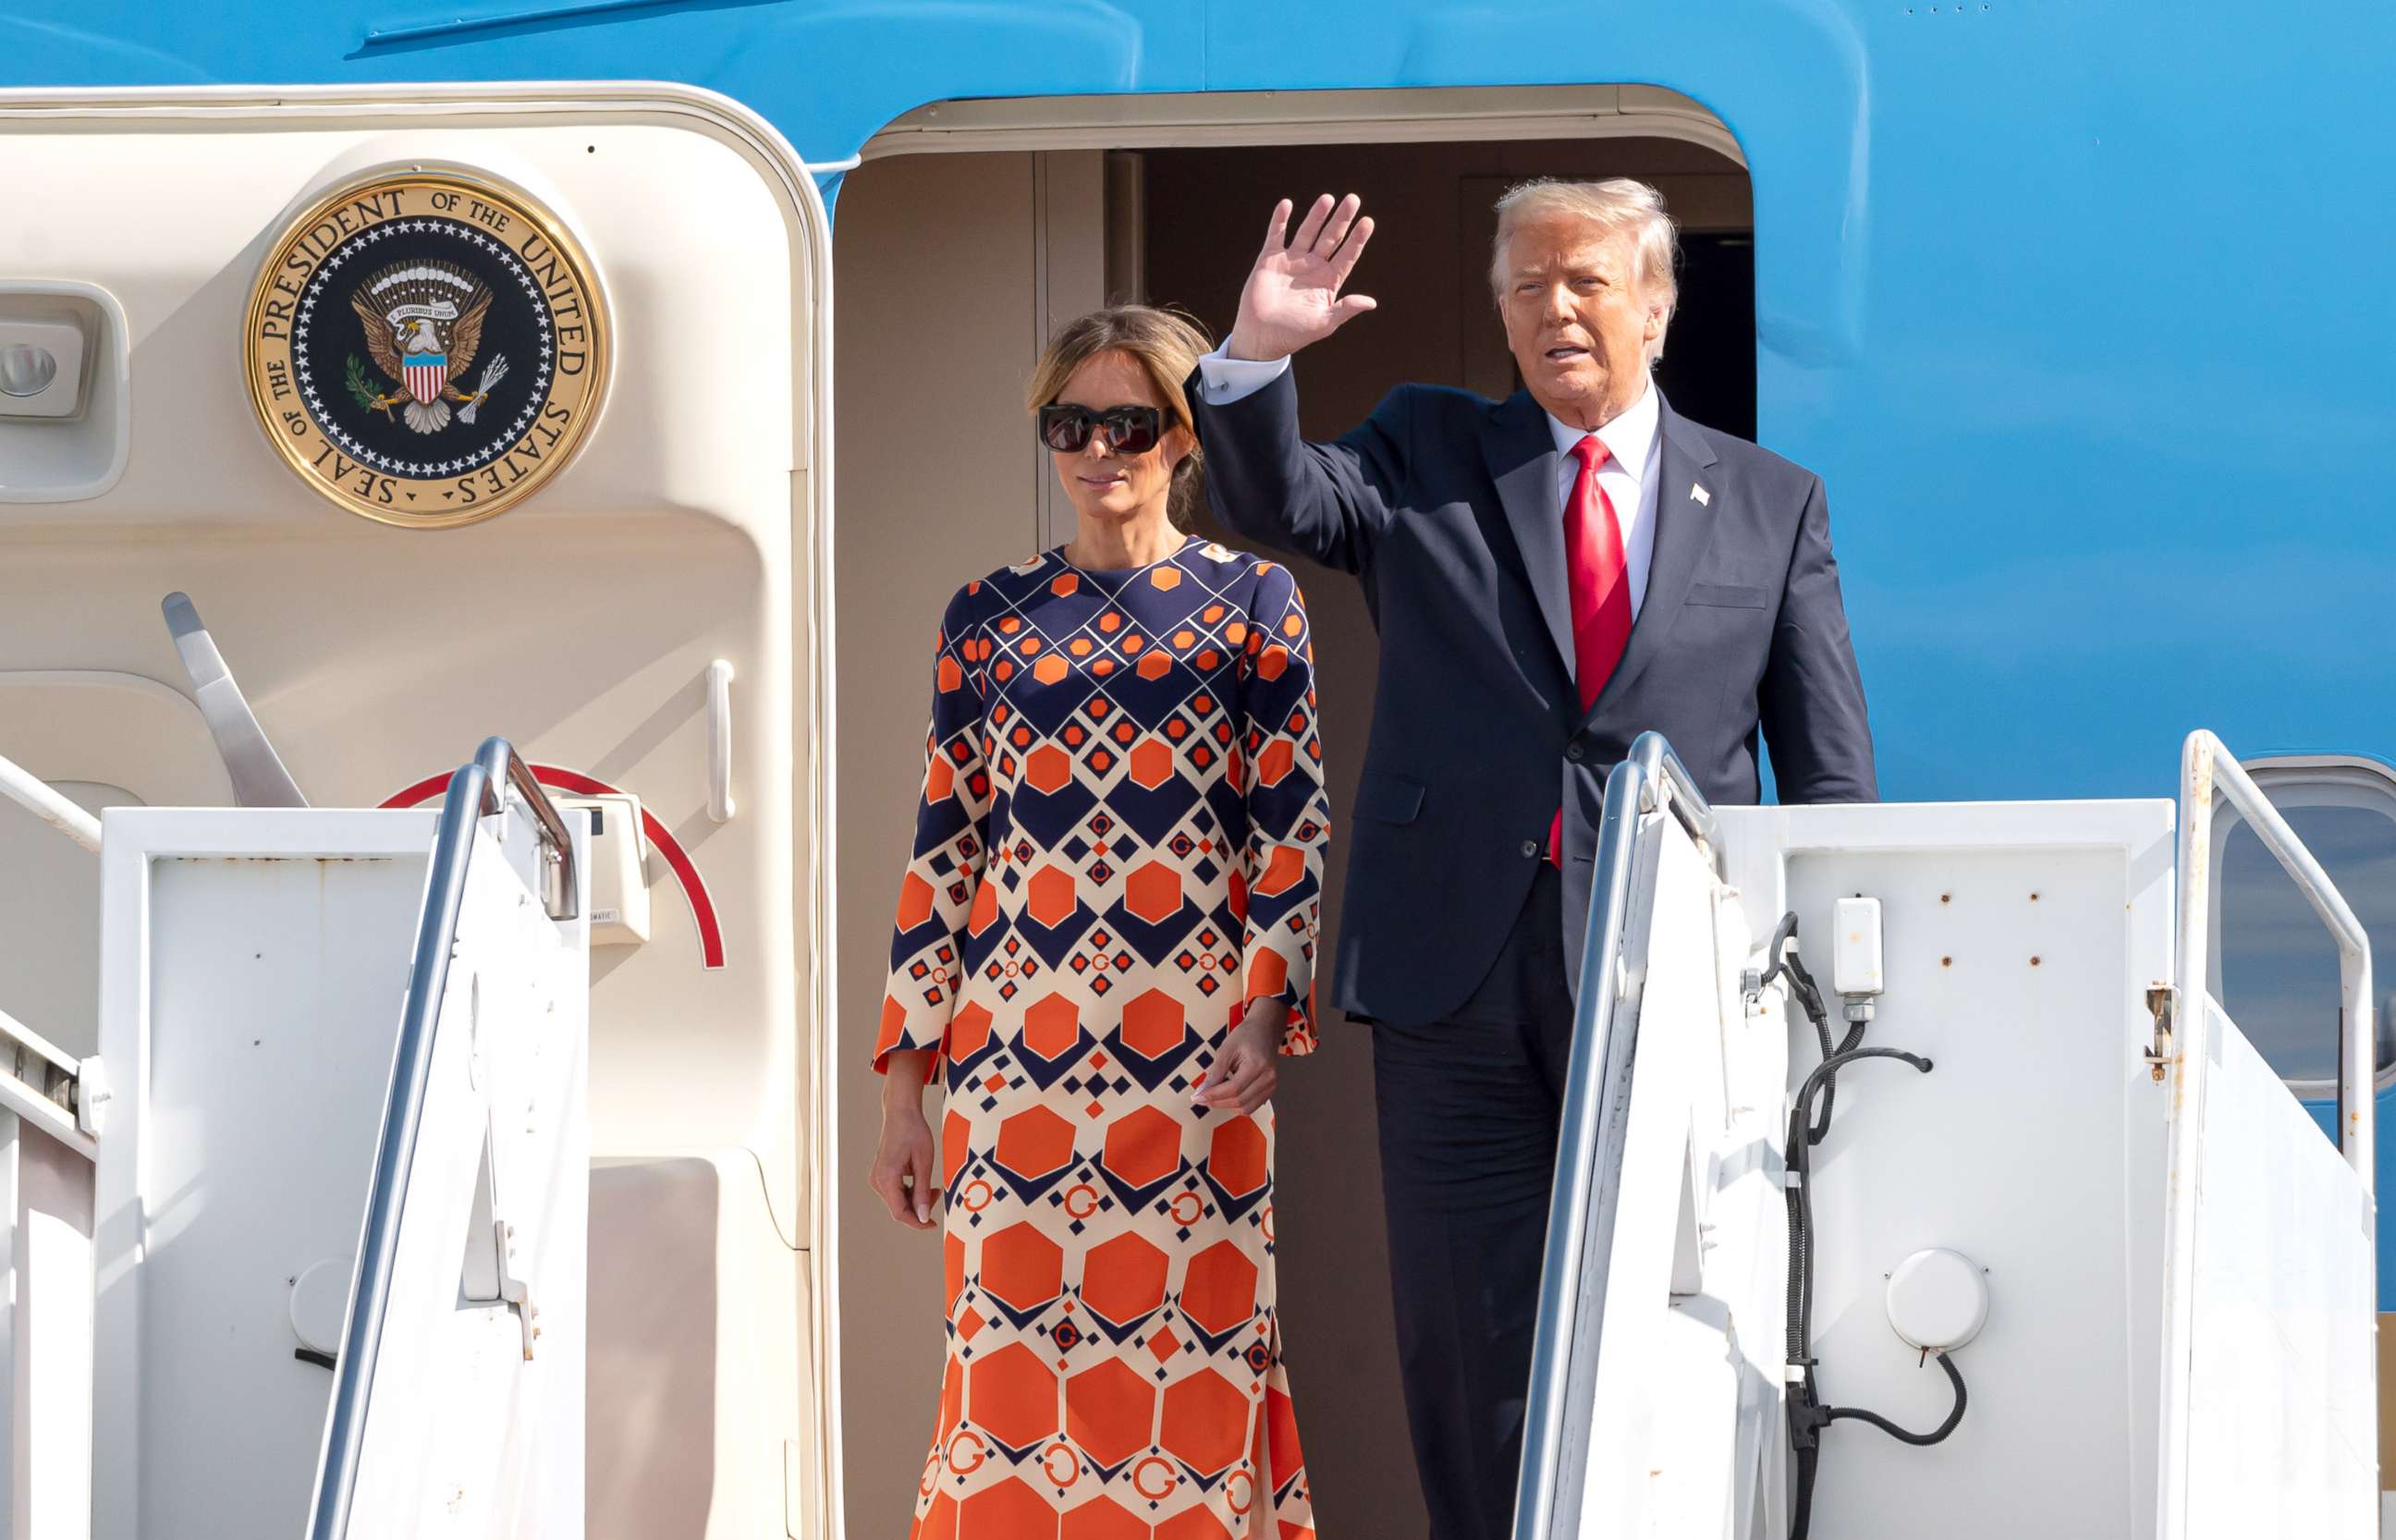 PHOTO: Outgoing U.S. President Donald Trump and First Lady Melania Trump exit Air Force One at the Palm Beach International Airport on the way to Mar-a-Lago Club on Jan. 20, 2020 in West Palm Beach, Fla.